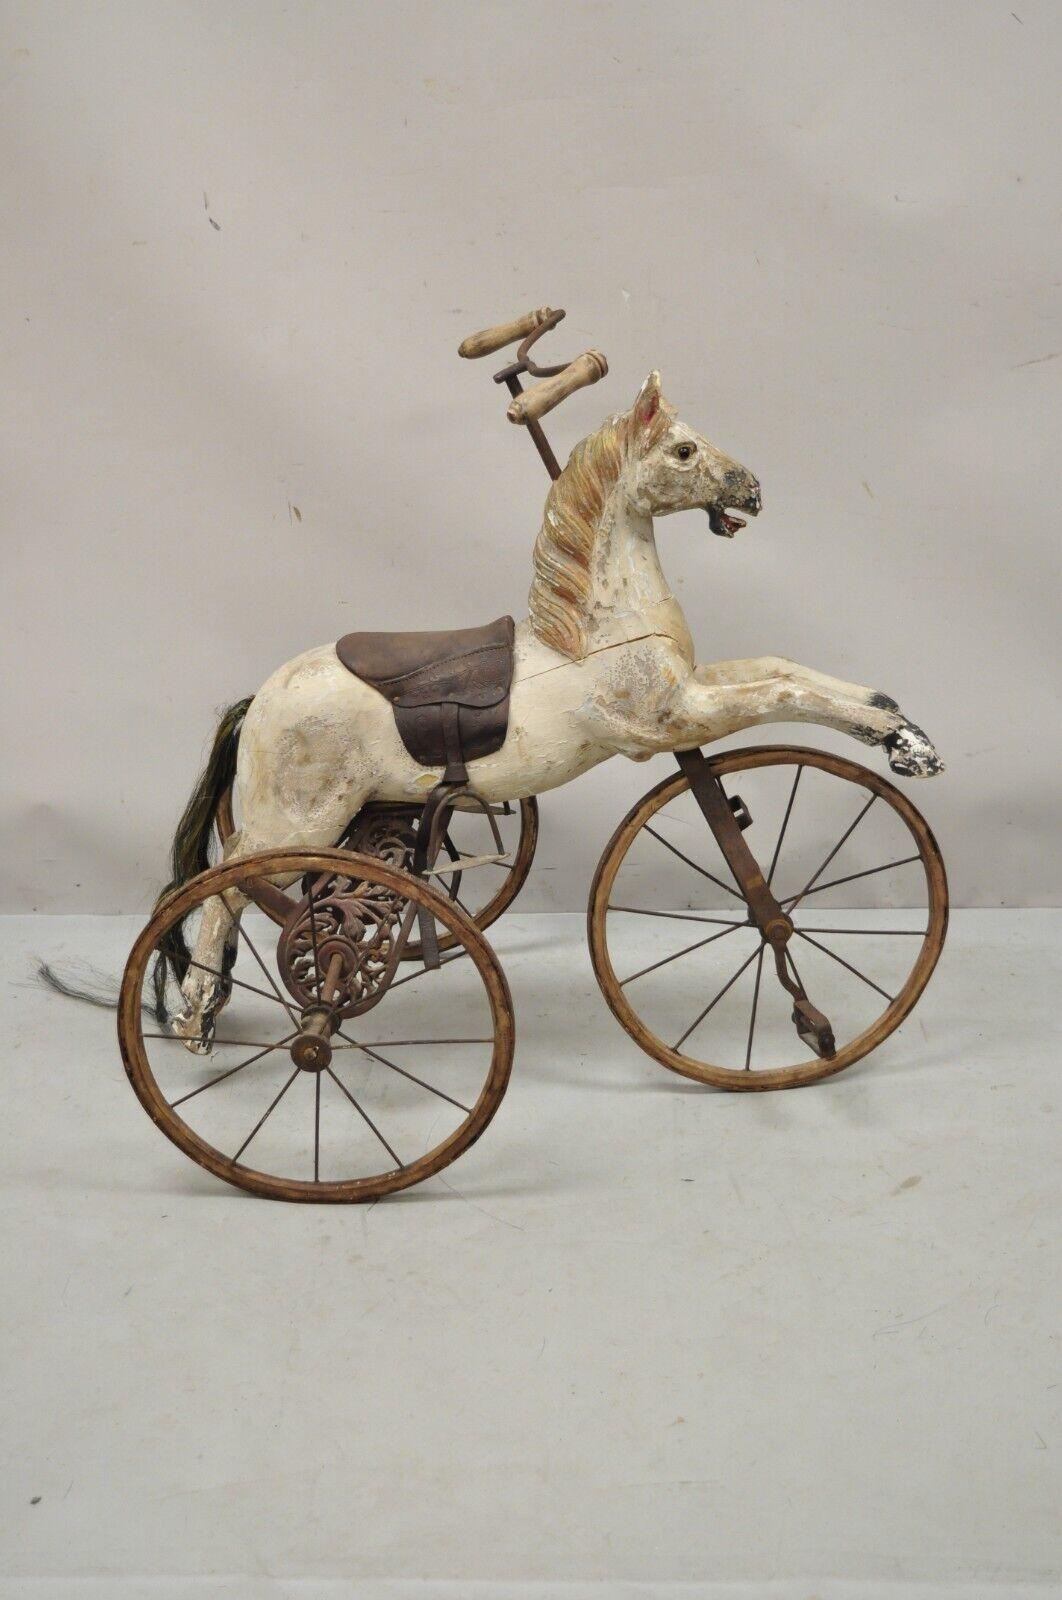 Vintage carved wood hobby horse wooden tricycle bike bicycle. Item features 
tricycle bike, carved wooden horse, distressed finish, iron hardware, glass eye, very nice vintage item, believed to be a reproduction. Circa mid-20th century.